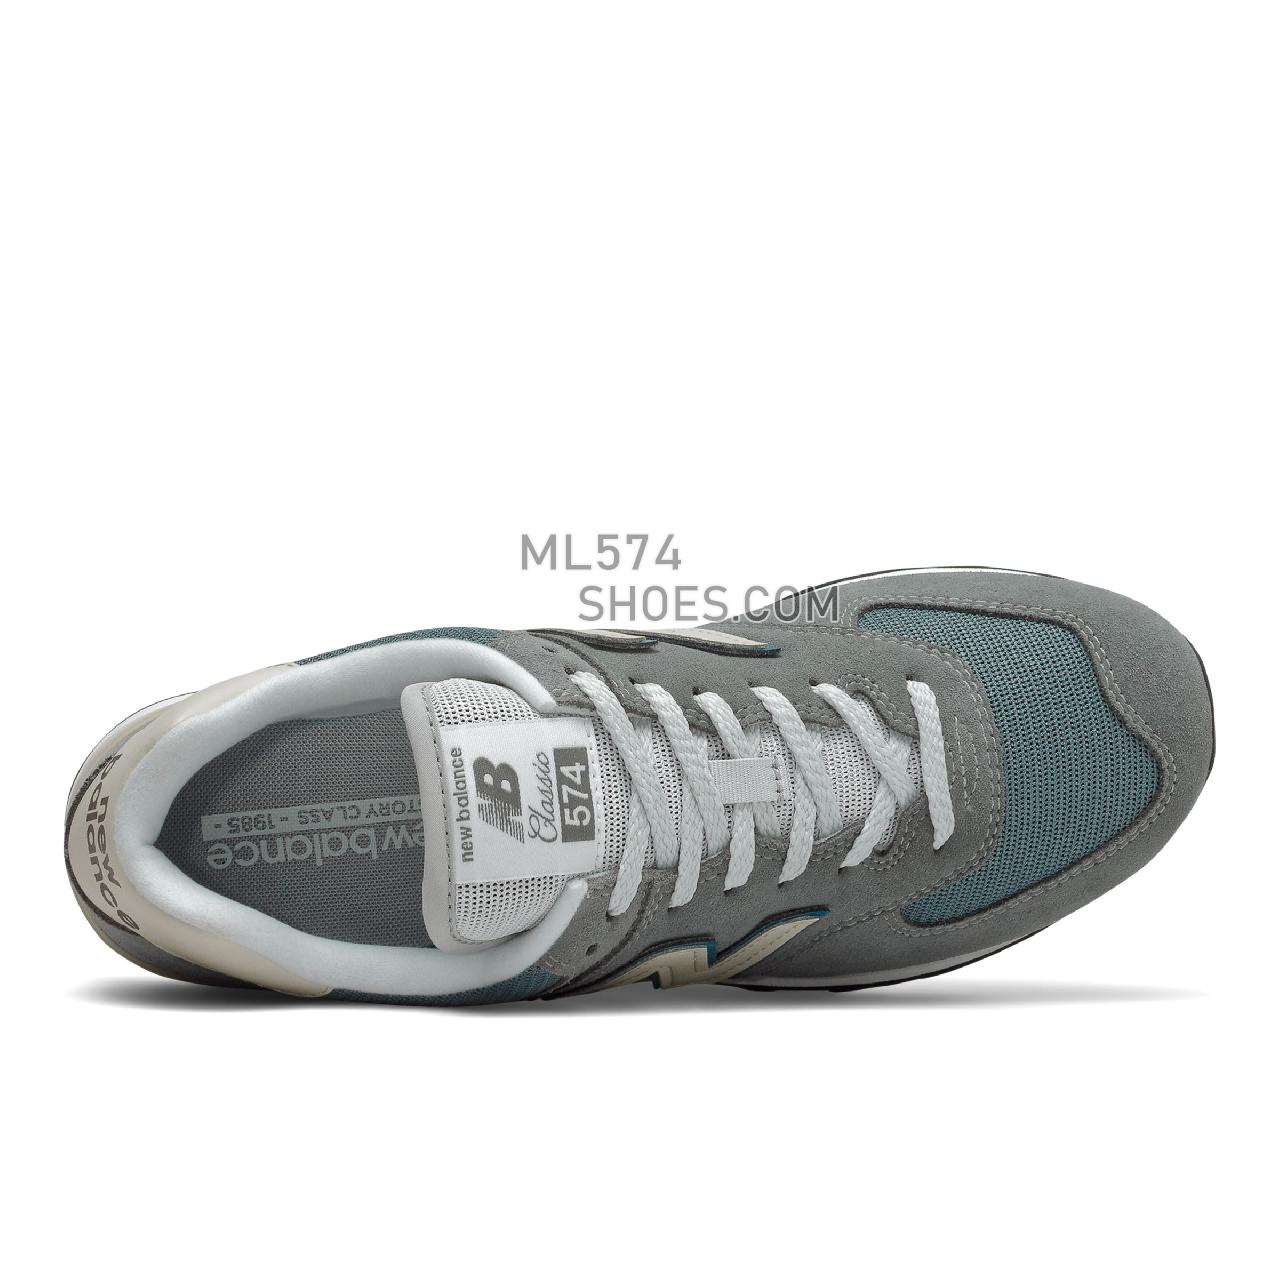 New Balance 574v2 - Men's Sport Style Sneakers - Grey with Sky Blue - ML574BA2